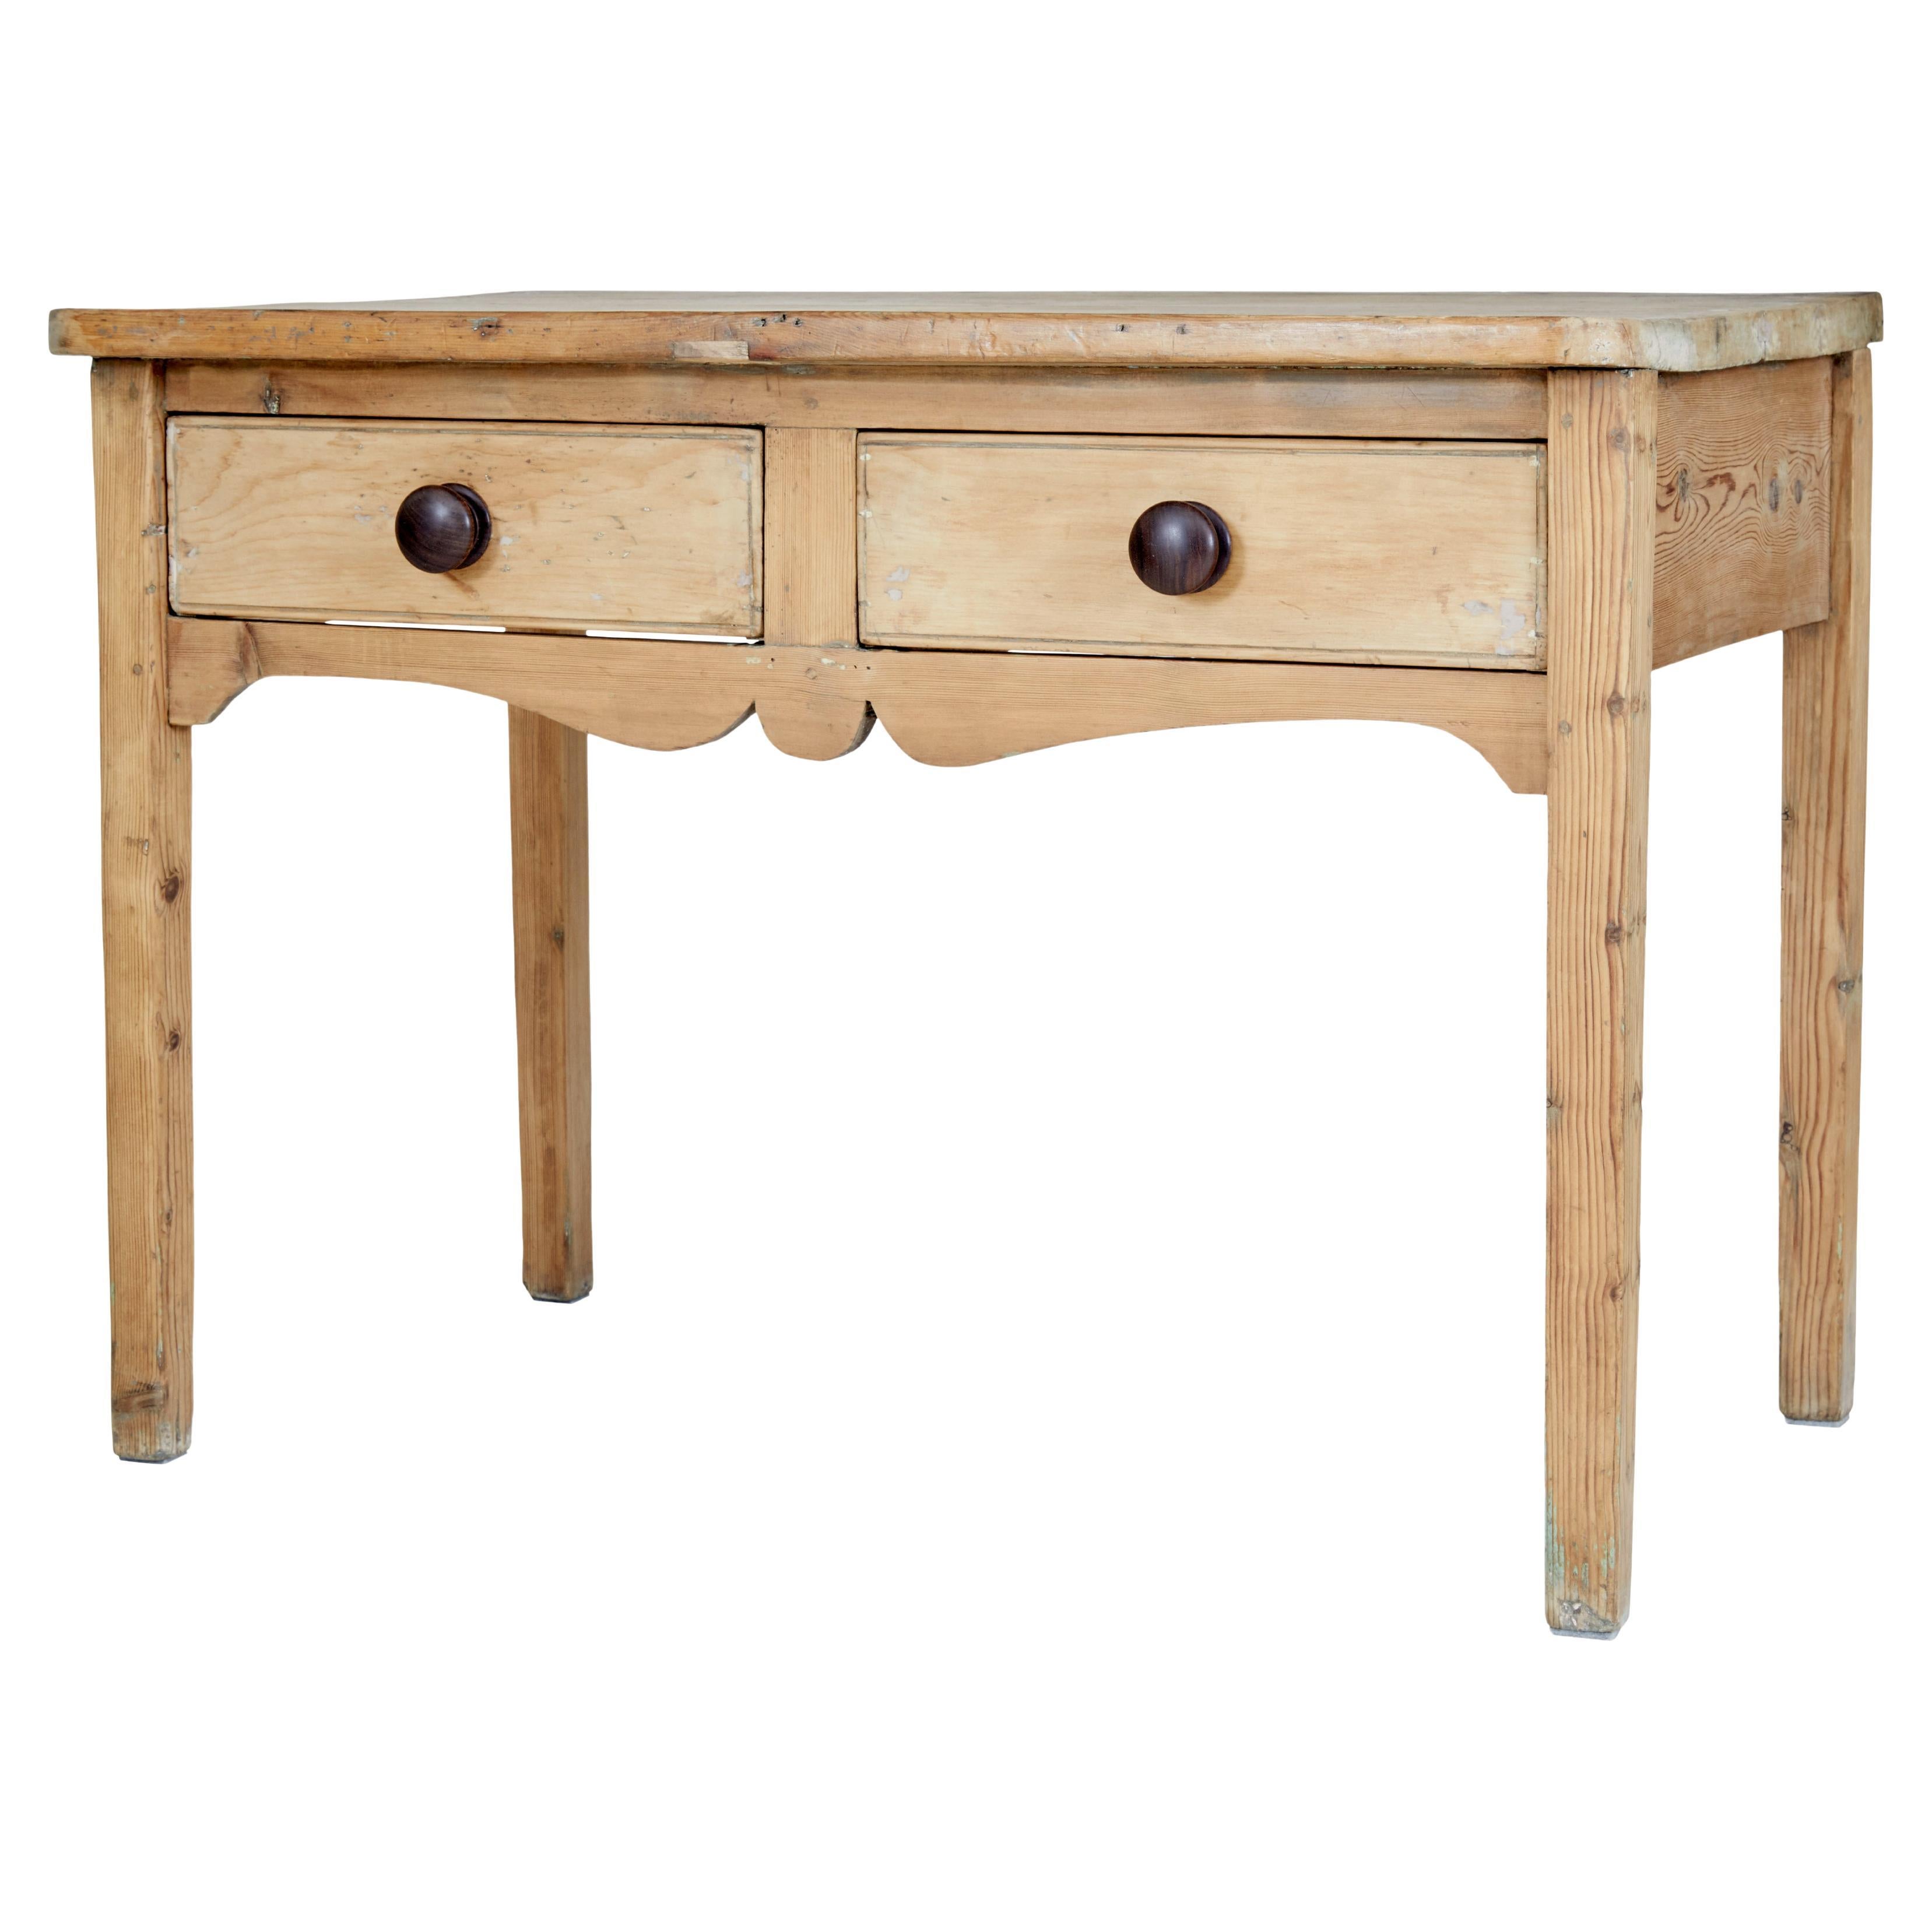 Rustic 19th Century Victorian Pine Kitchen Table For Sale